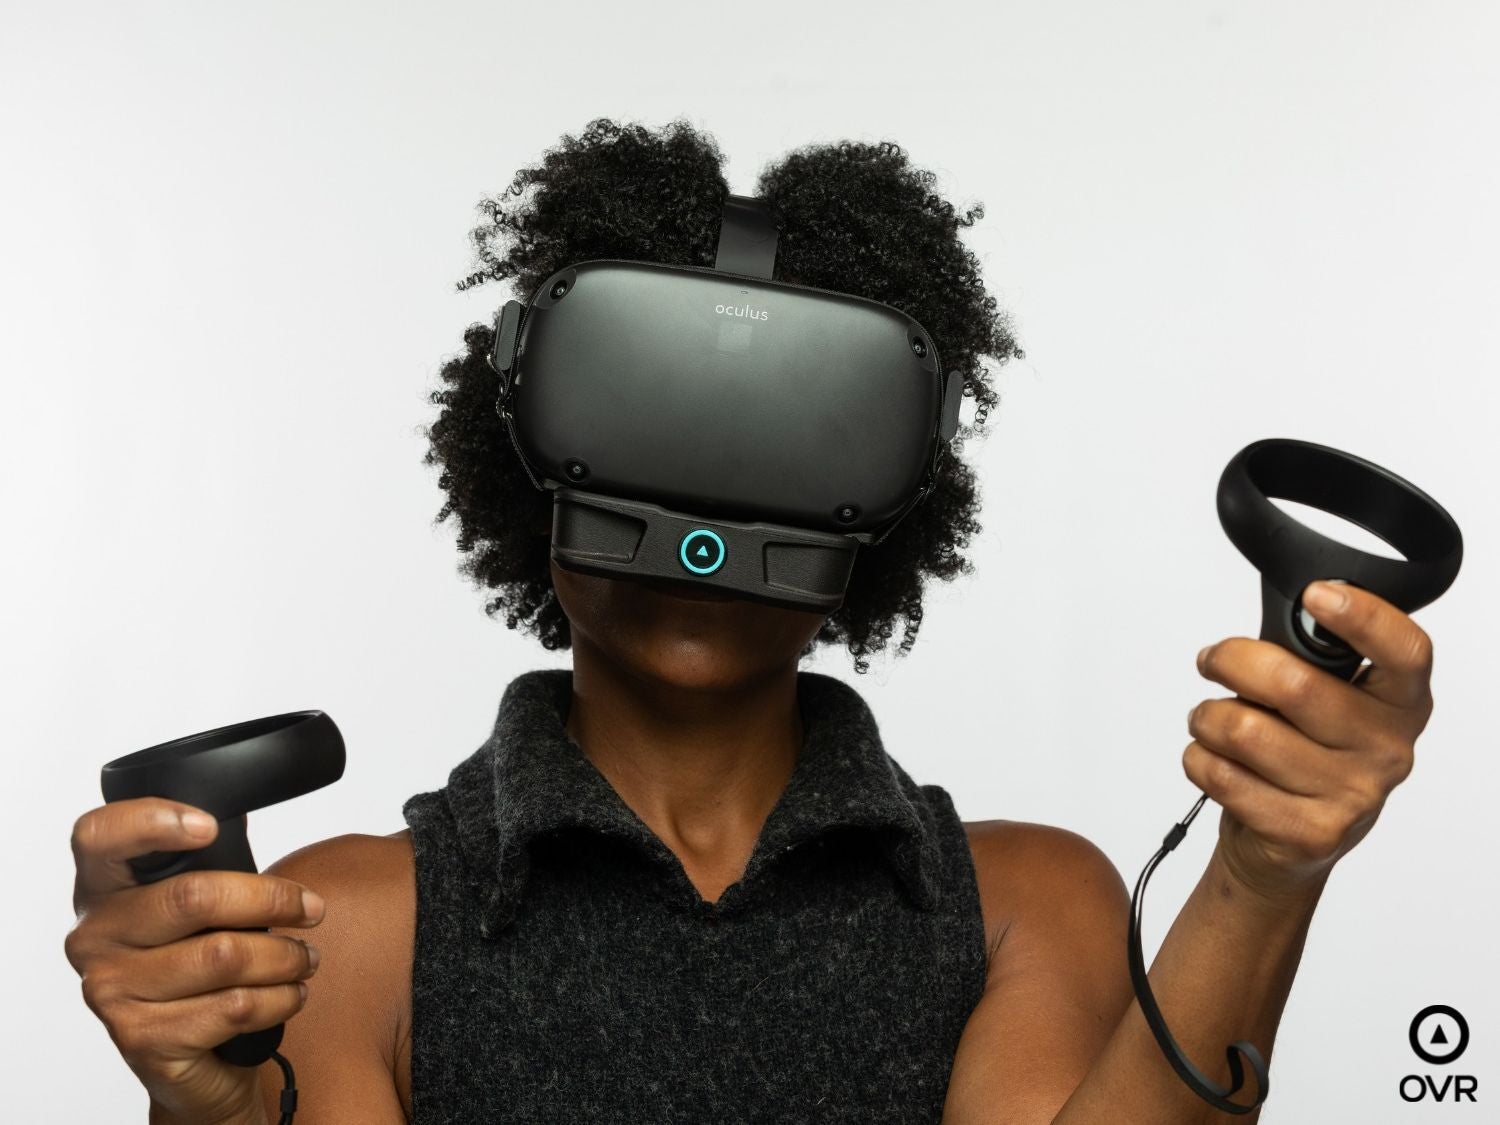 Do you remember that previous comment about tech that makes you look like a Cenobite? - Smart forks, air-purifying headphones and smell-enabled VR sets are the latest in Weird Tech